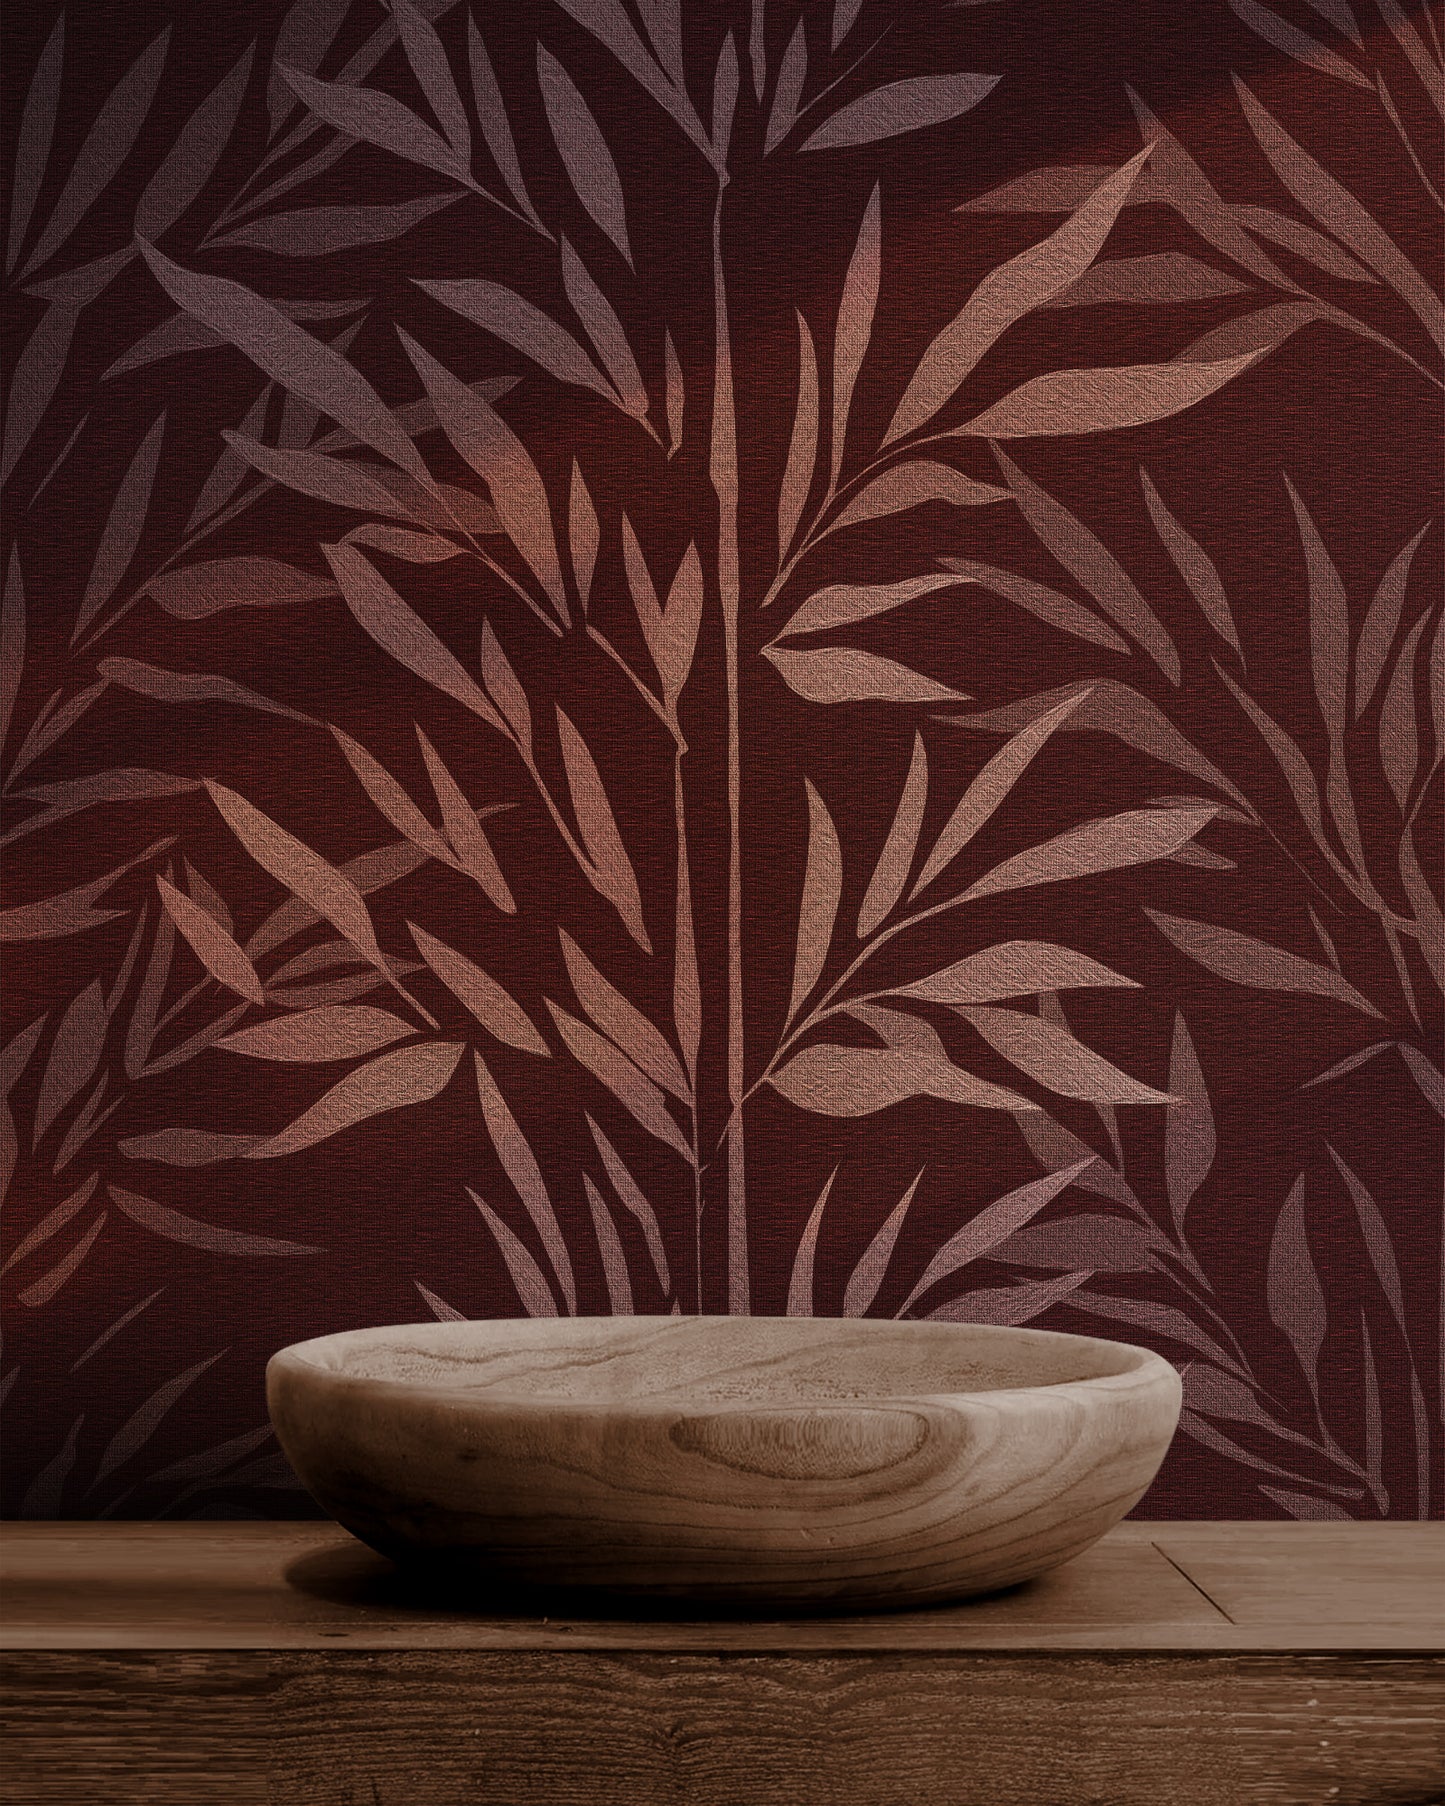 BAMBOO FOREST WALL MURAL